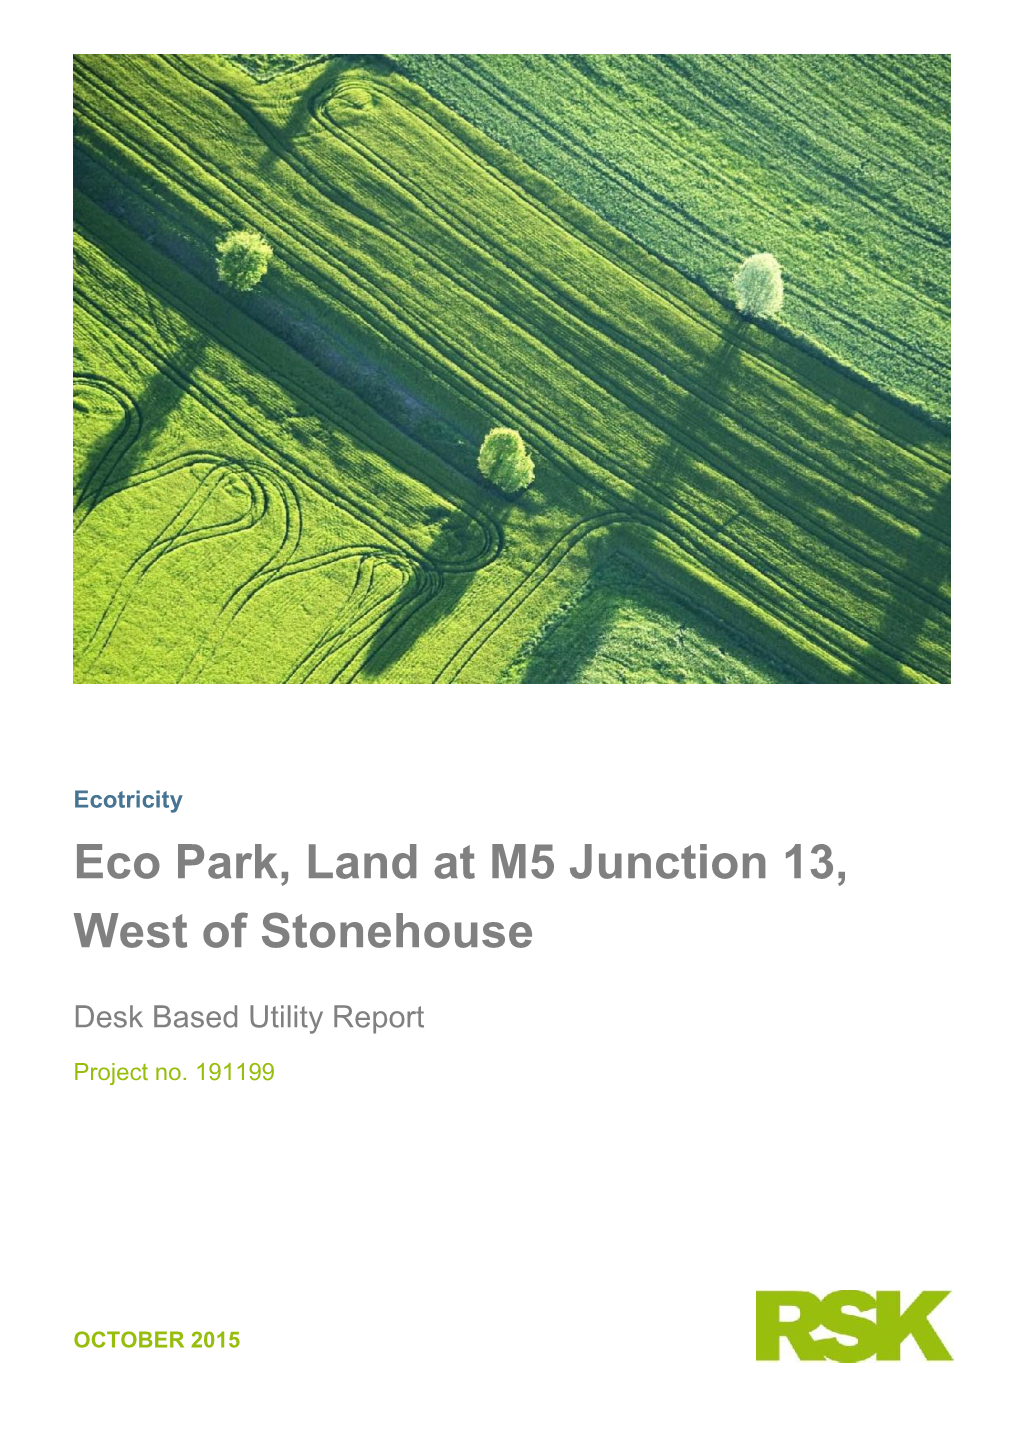 Eco Park, Land at M5 Junction 13, West of Stonehouse